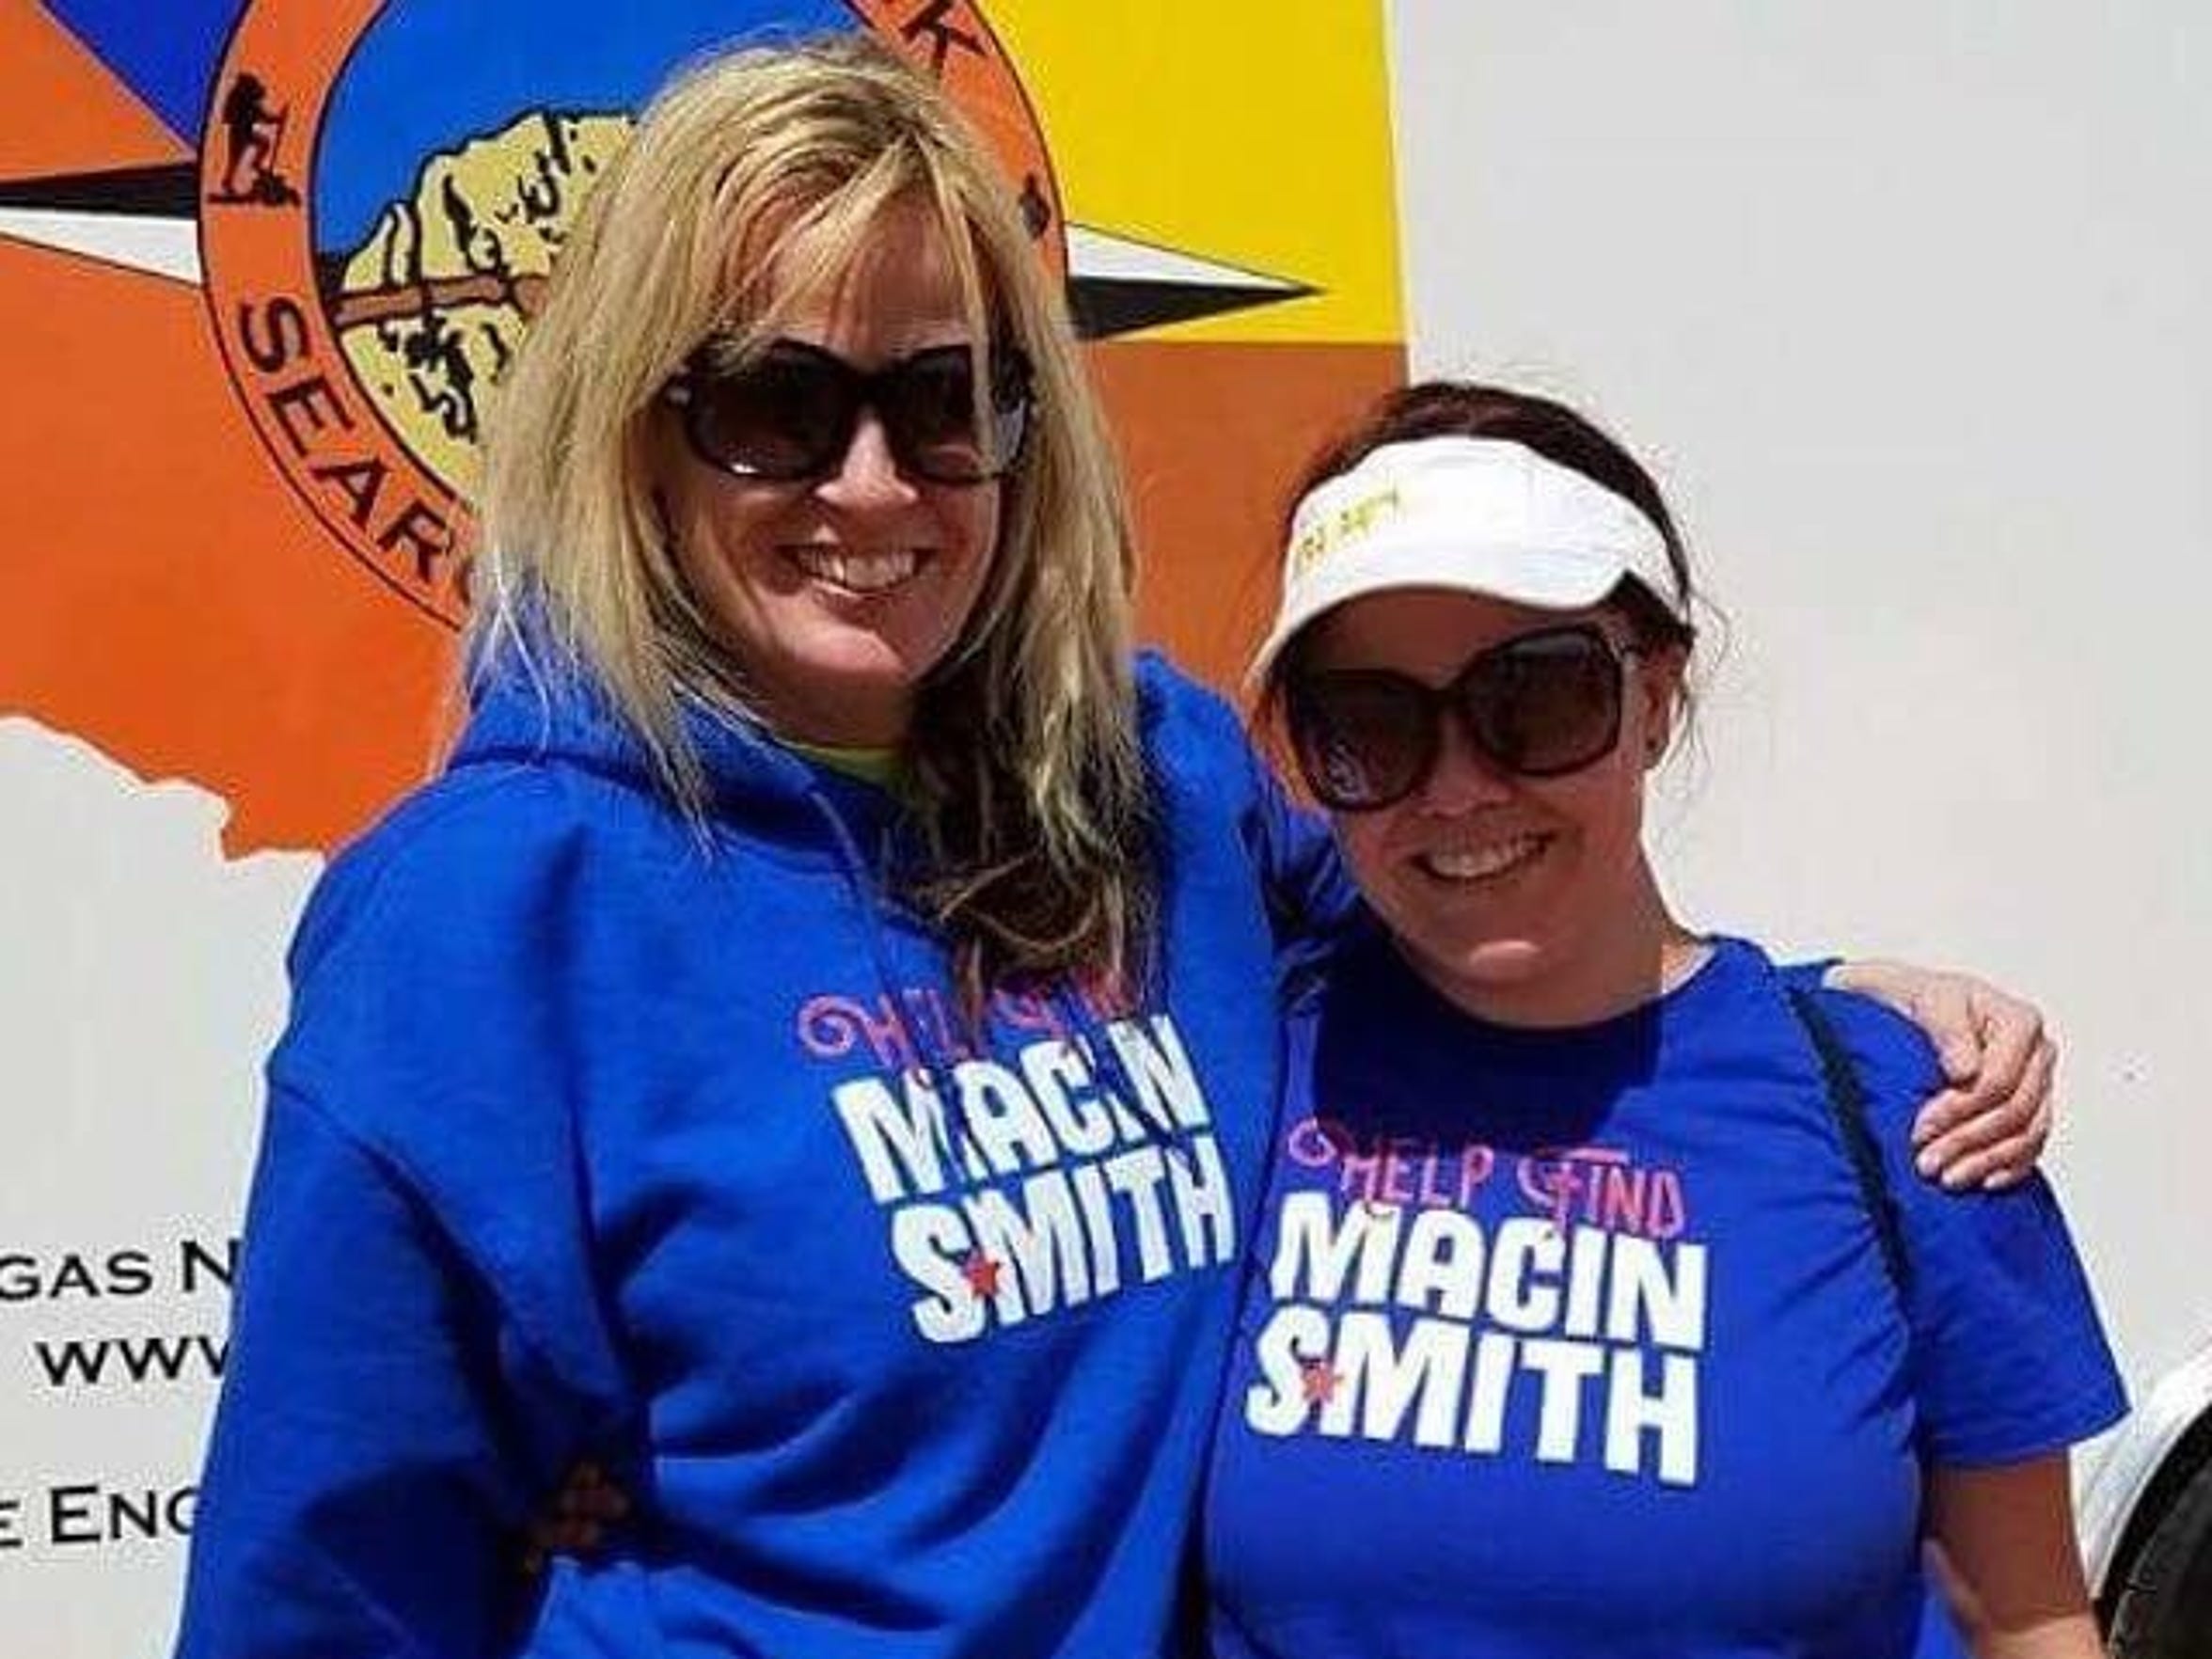 Macin Smith Missing For 2 Years